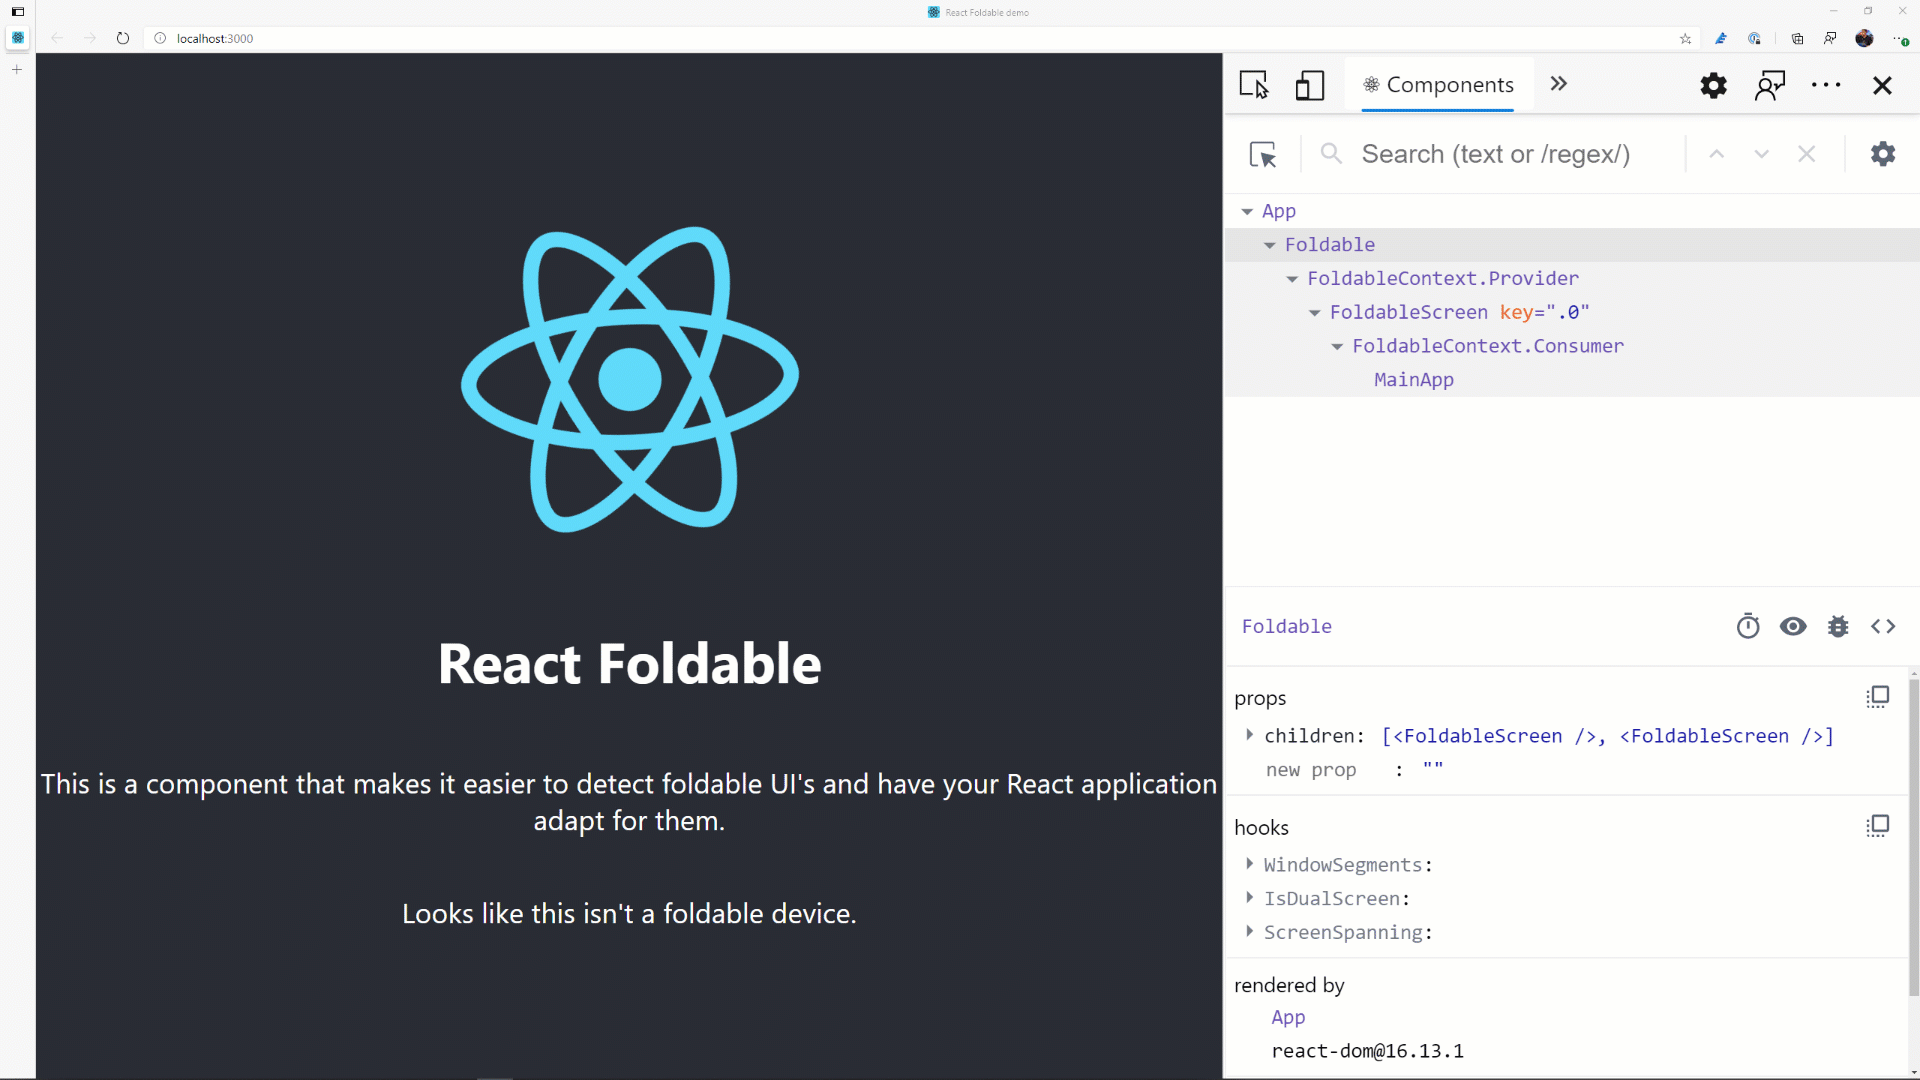 React-Foldable in action